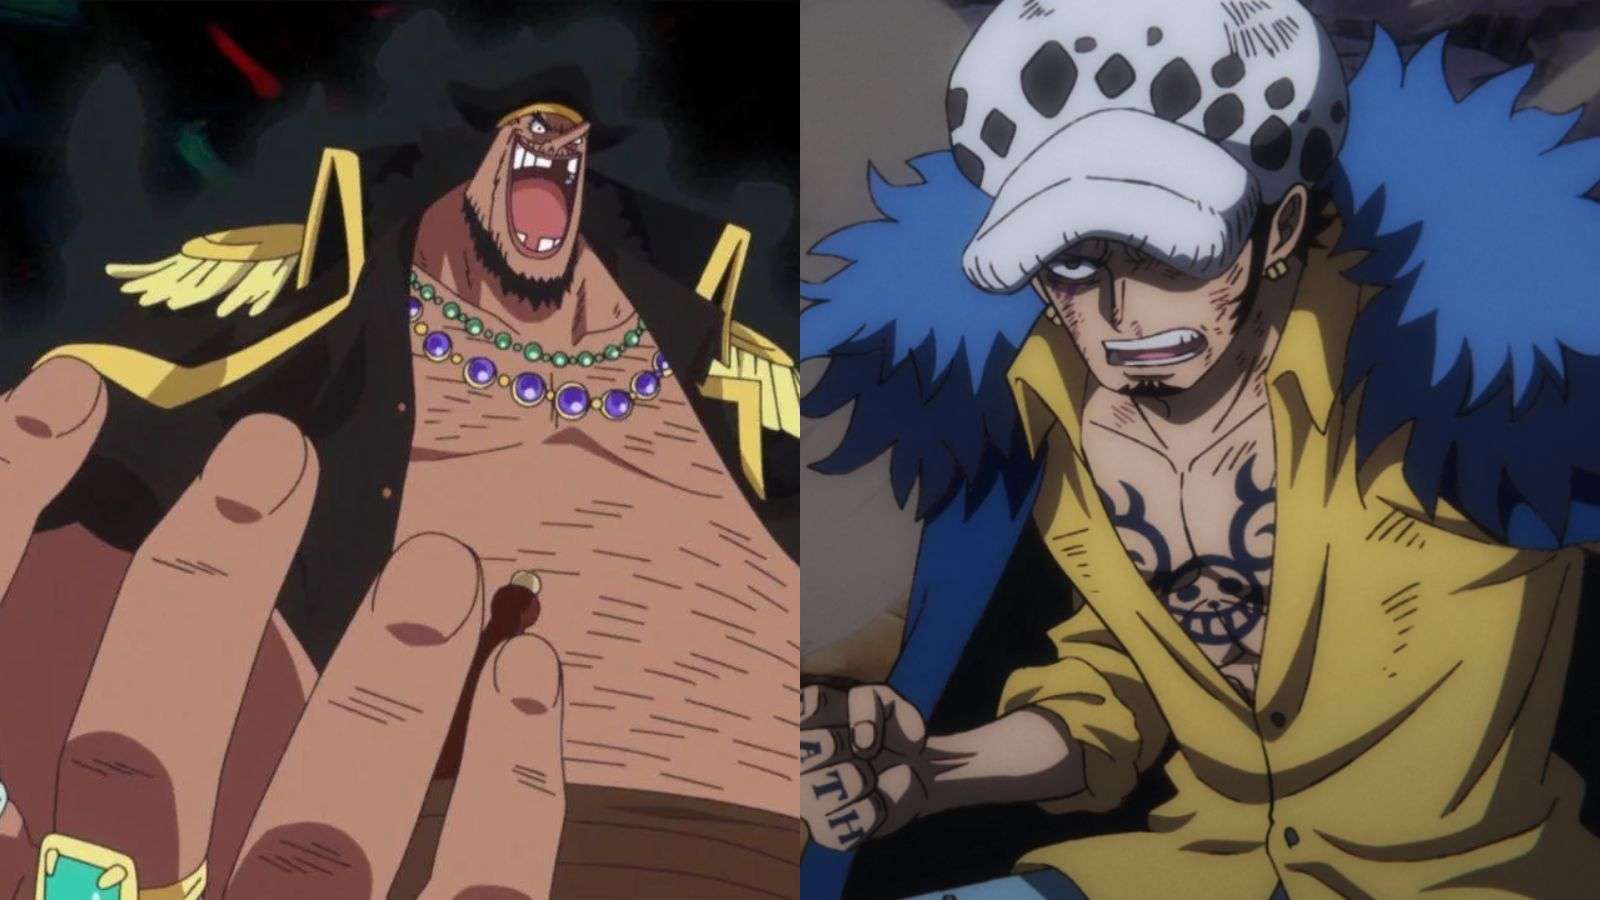 An image of Trafalgar Law and Marshall D. Teach from One Piece